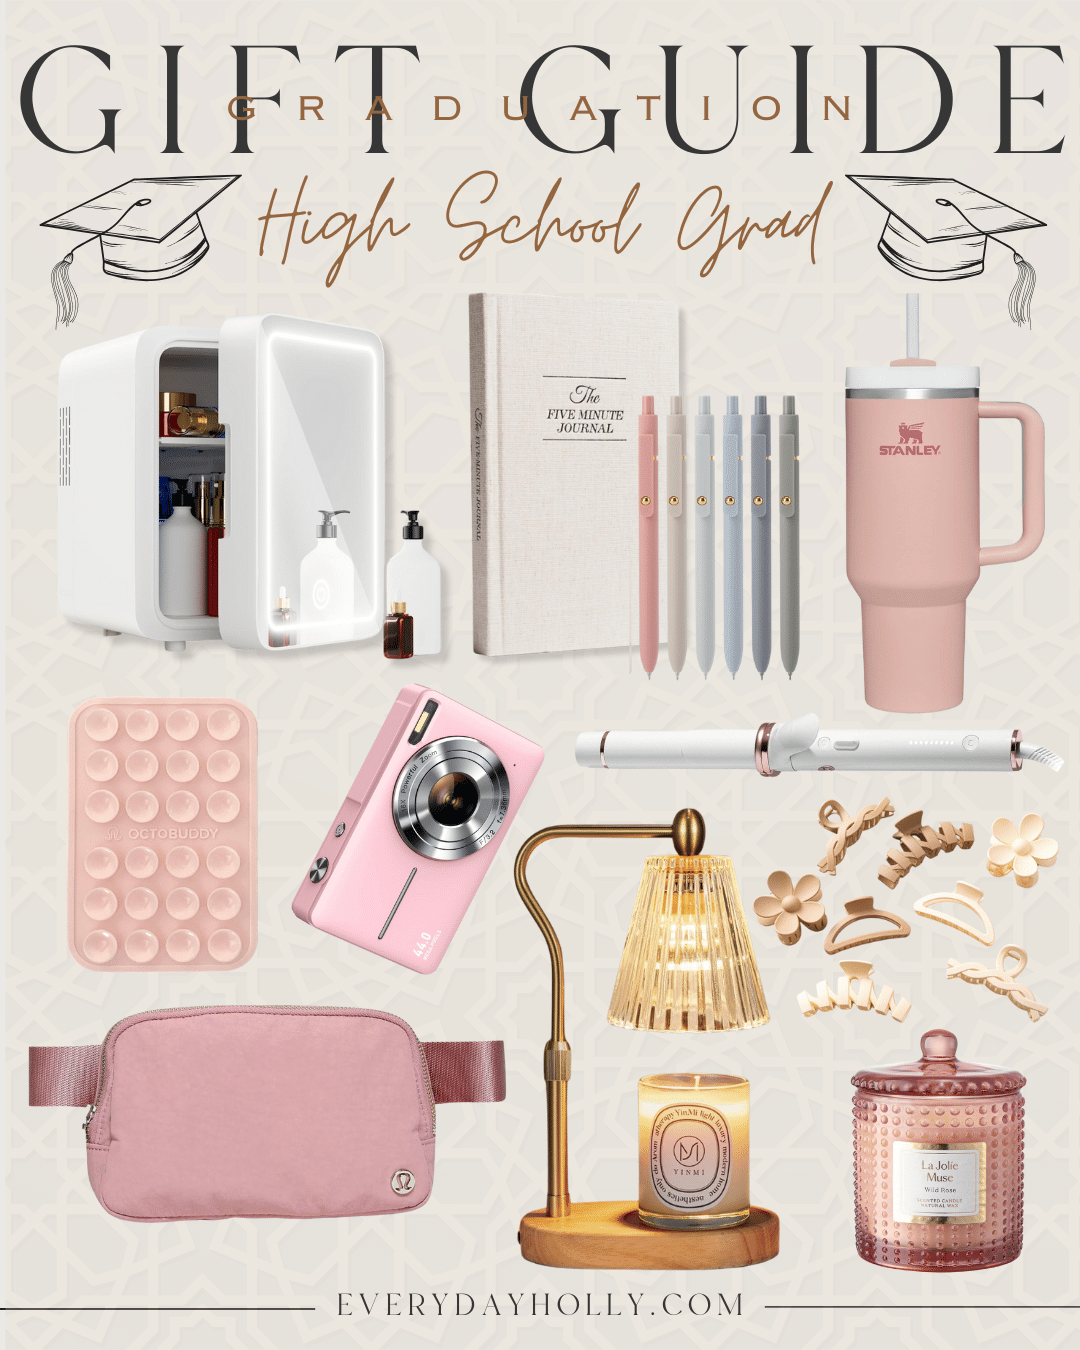 45 gift ideas for the graduate in your life | gift guide, gift ideas, graduation gift, graduate, high school grad, college grad, skincare., beauty, journal, stanley, phone accessories, curling iron, gifts for her, gifts for teen girl